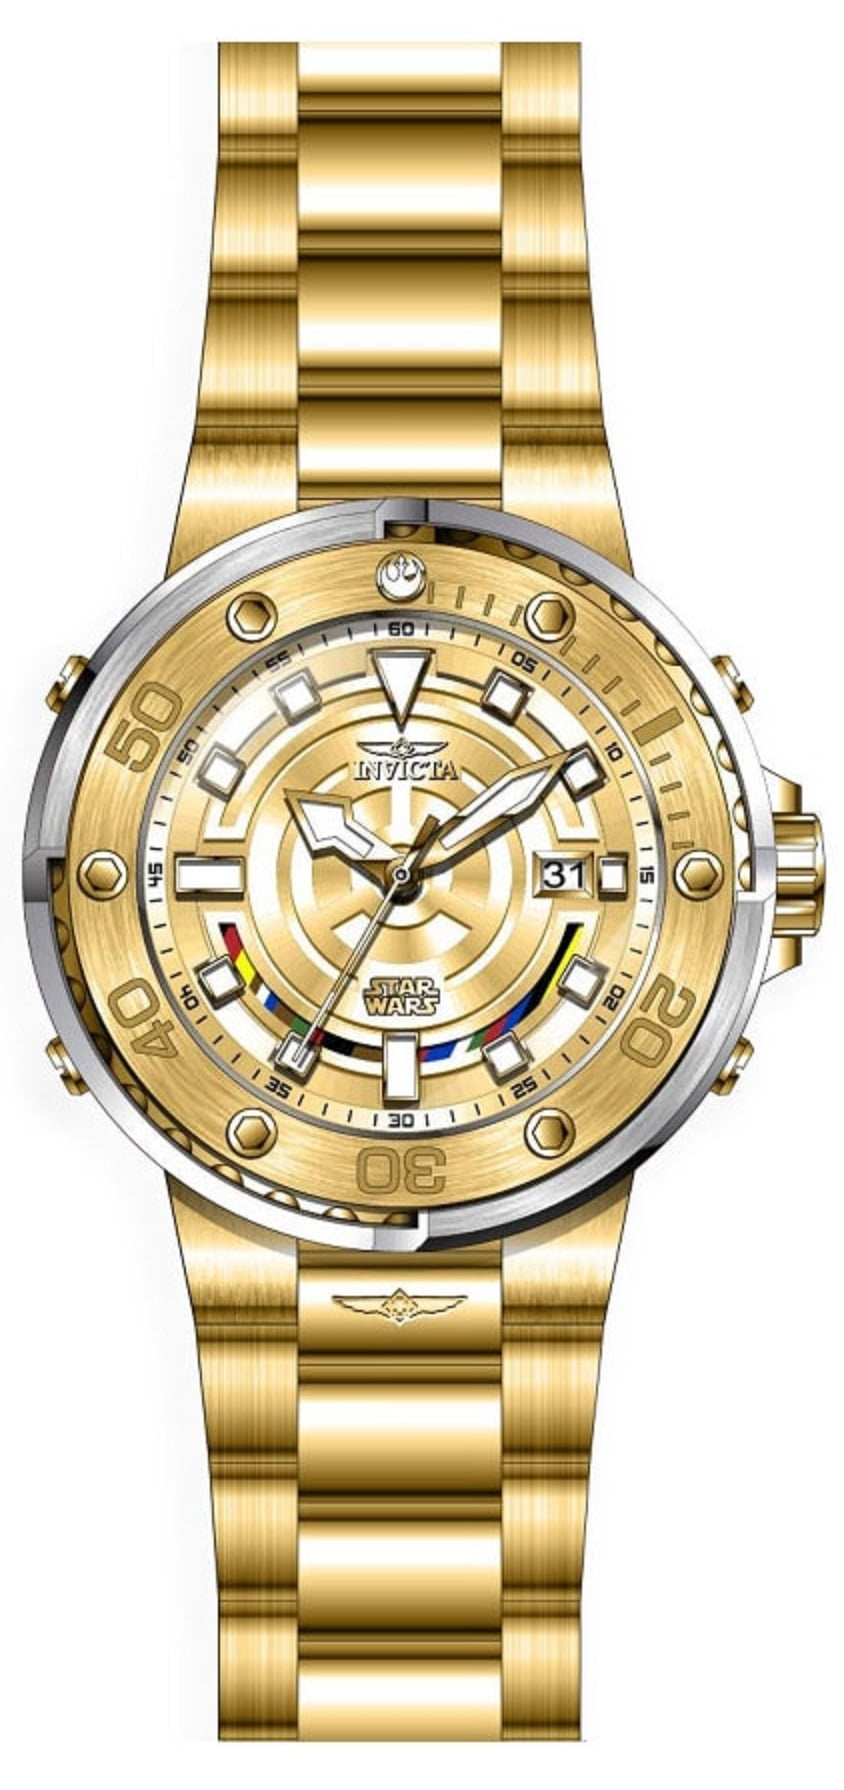 Invicta Men's 26114 Star Wars Automatic Multifunction Gold Dial Watch